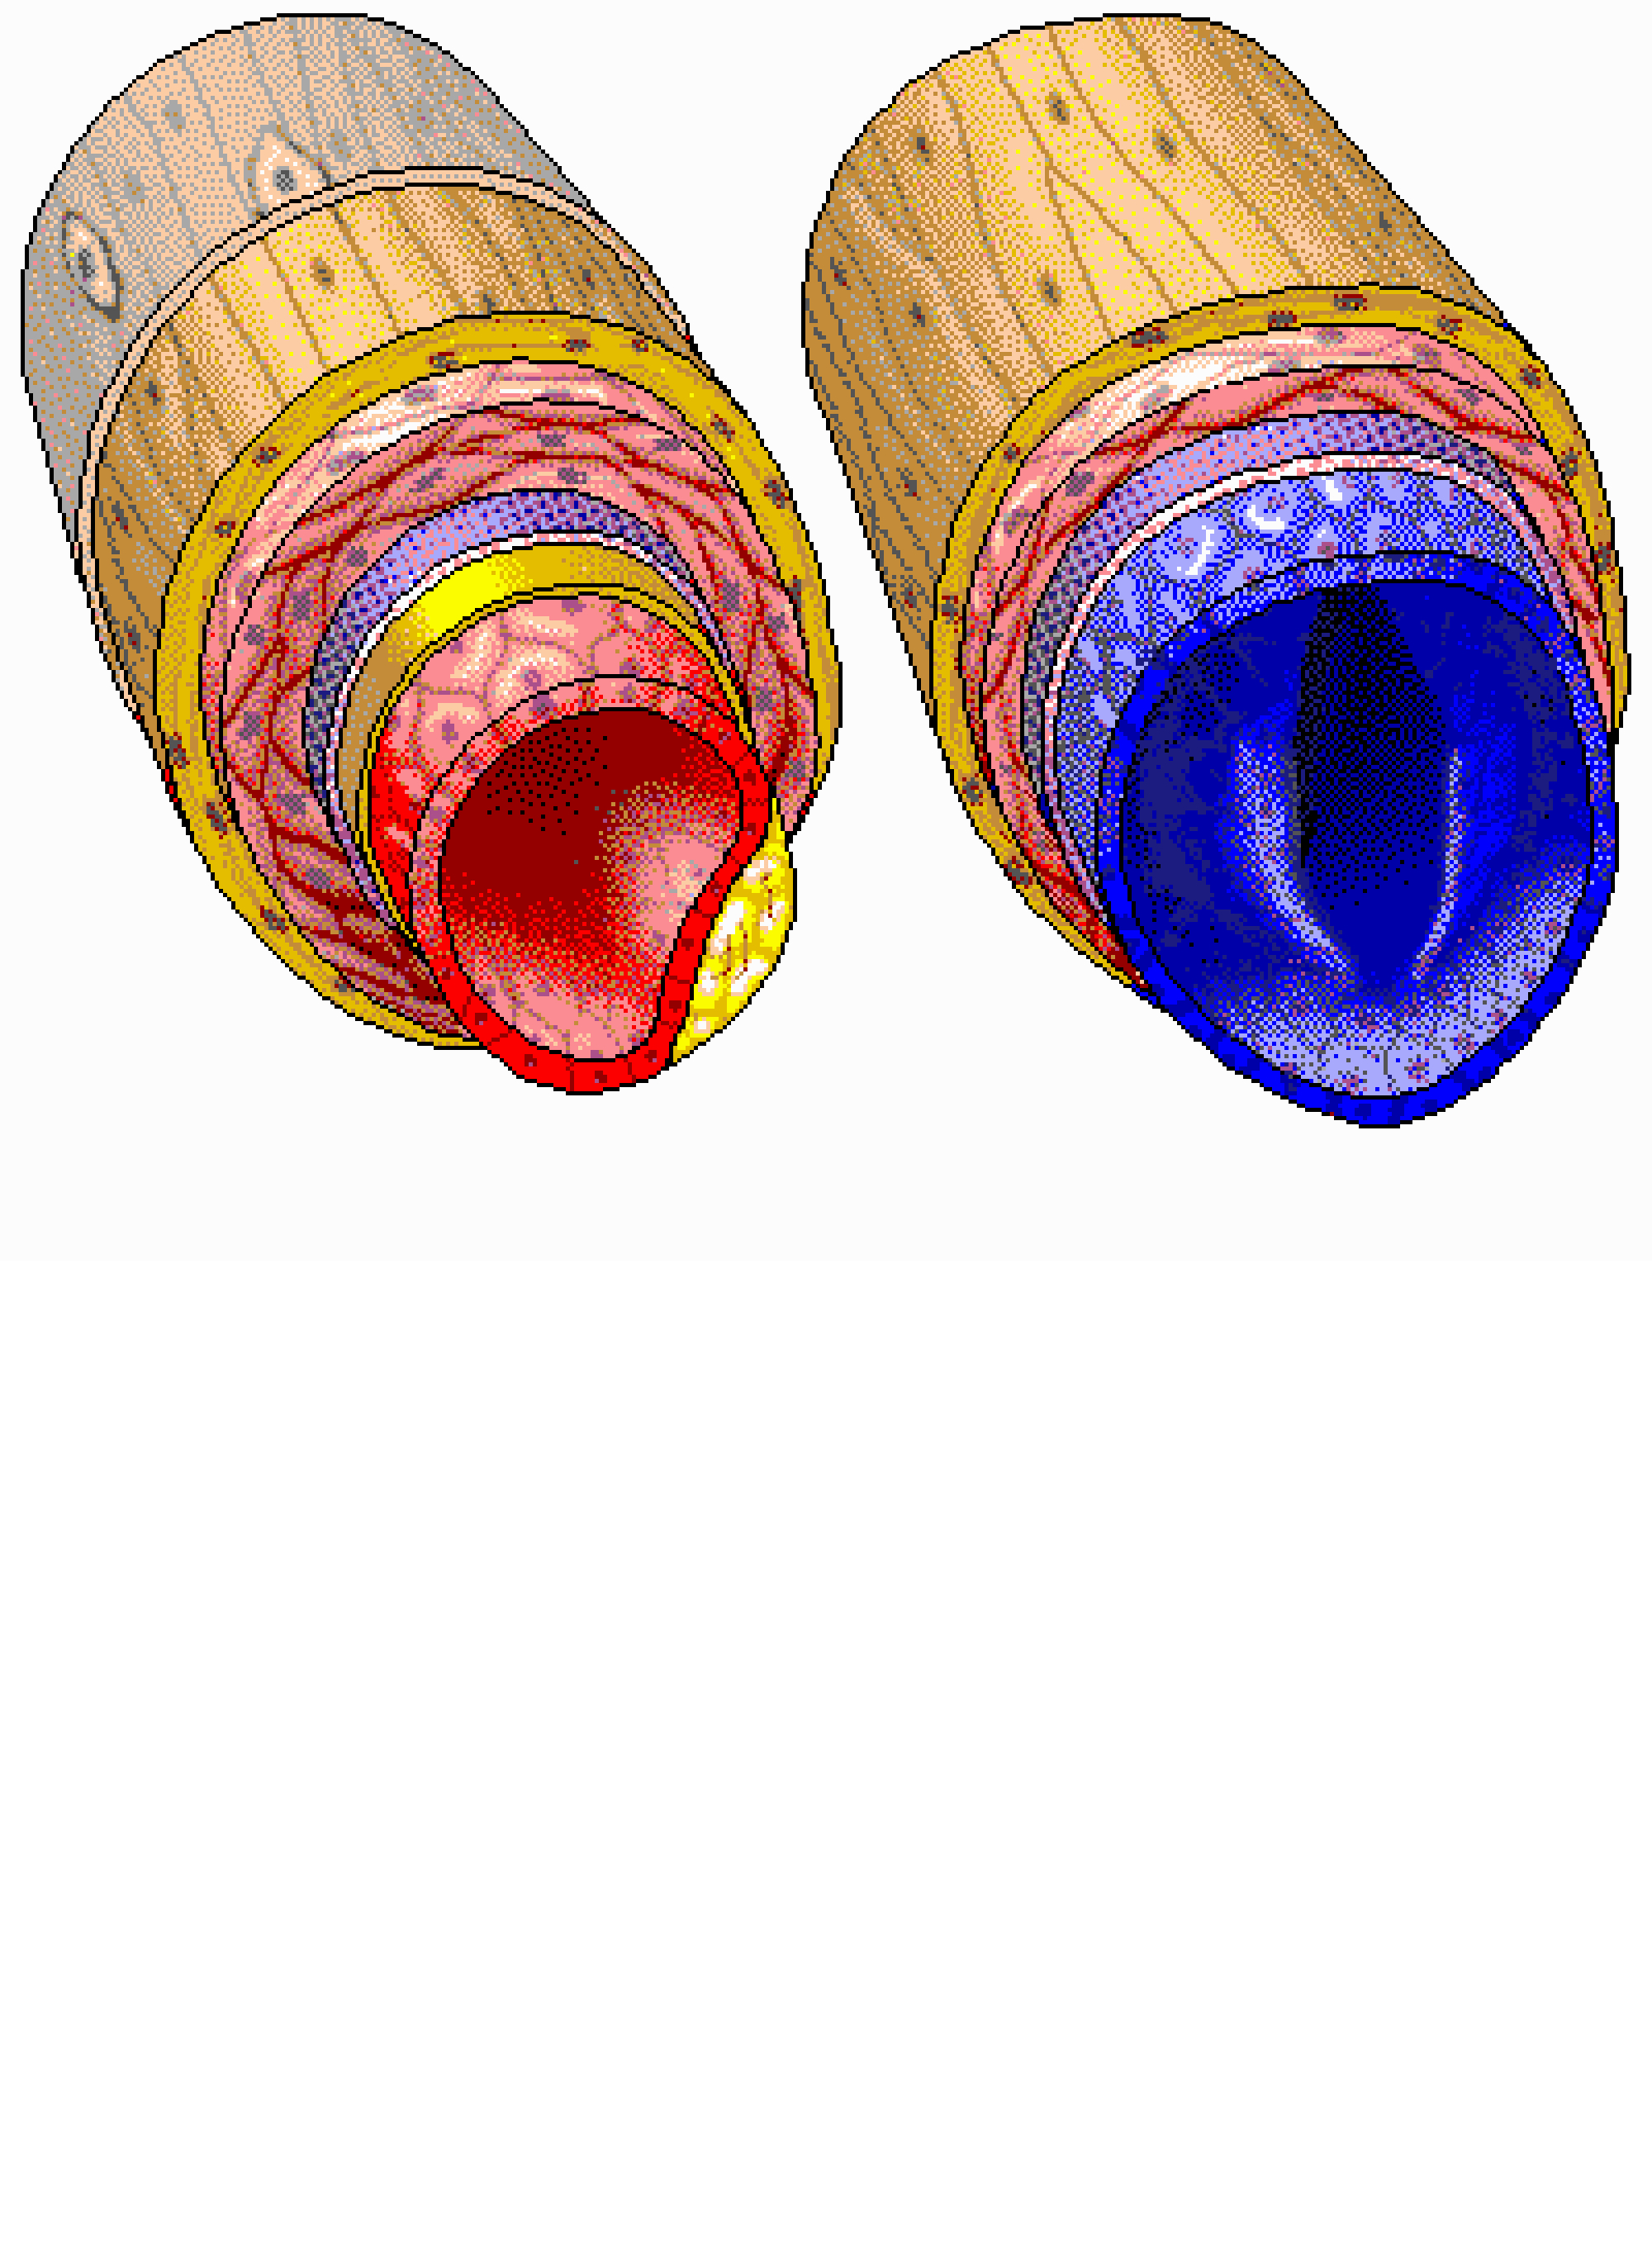 Arteries And Veins Diagram Cross Section Of Artery And Vein Interactive Anatomy Guide